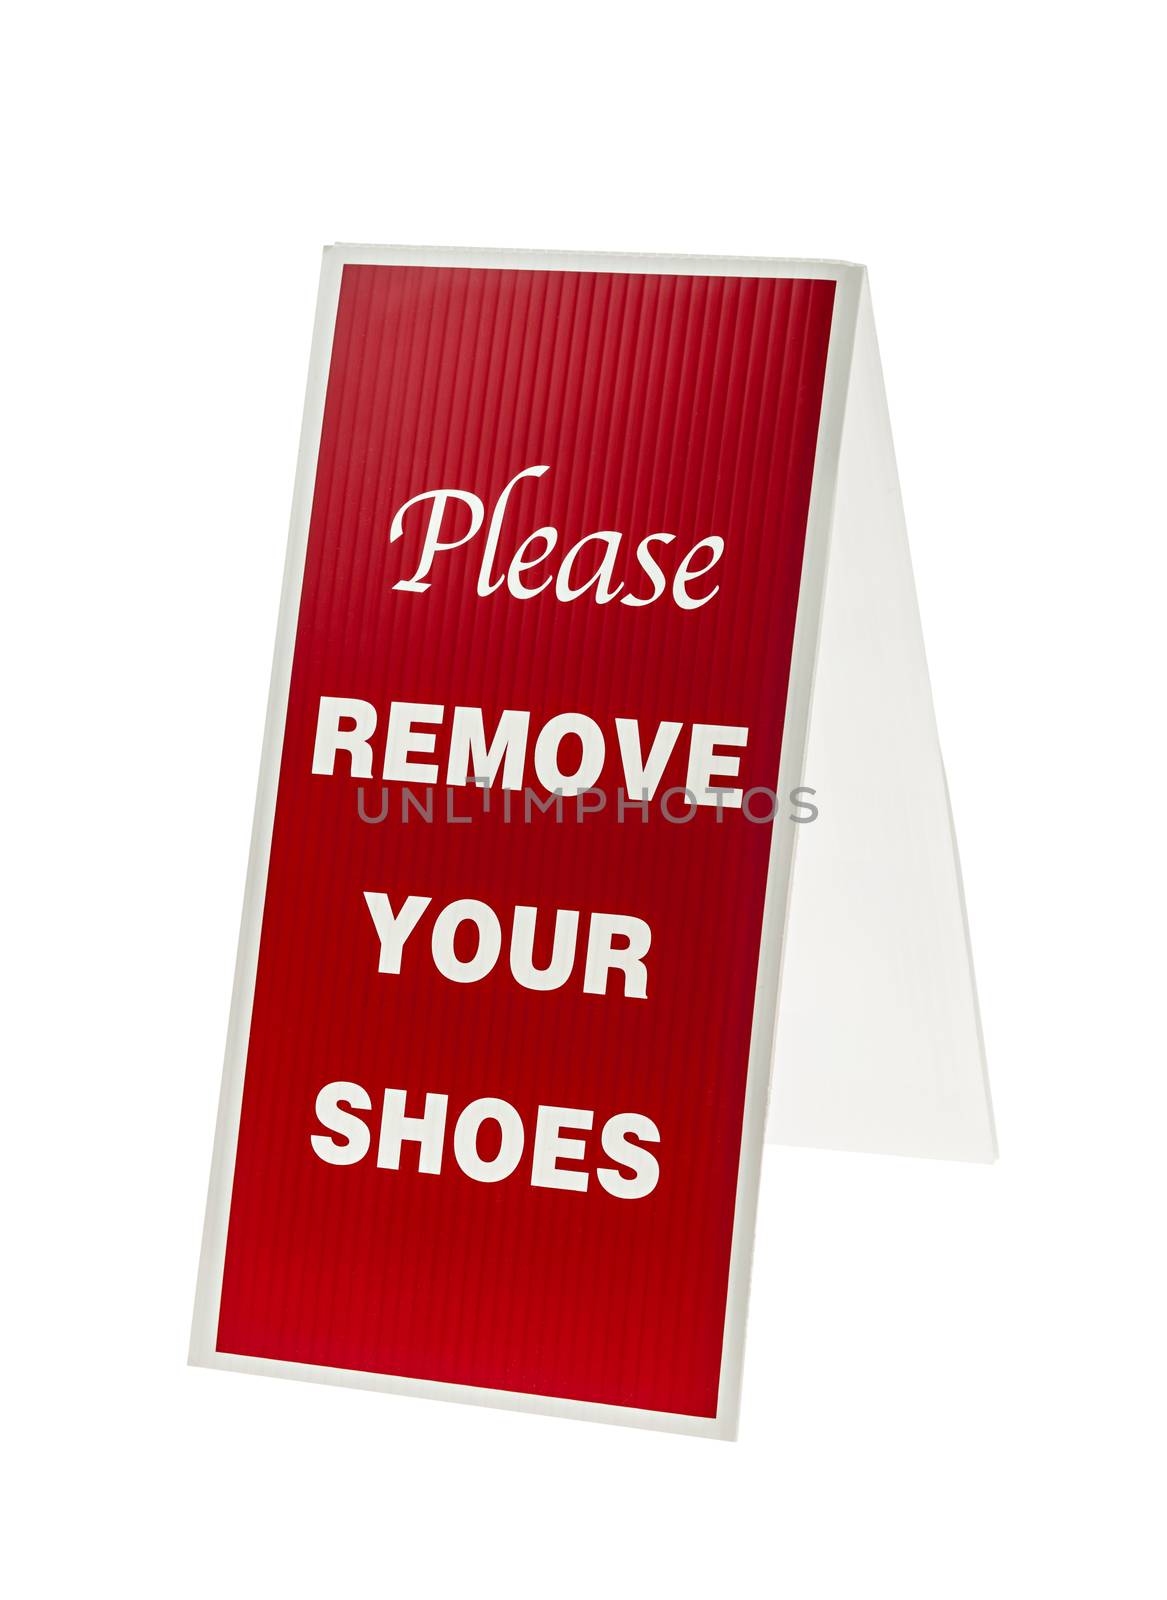 Remove your shoes sign by elenathewise